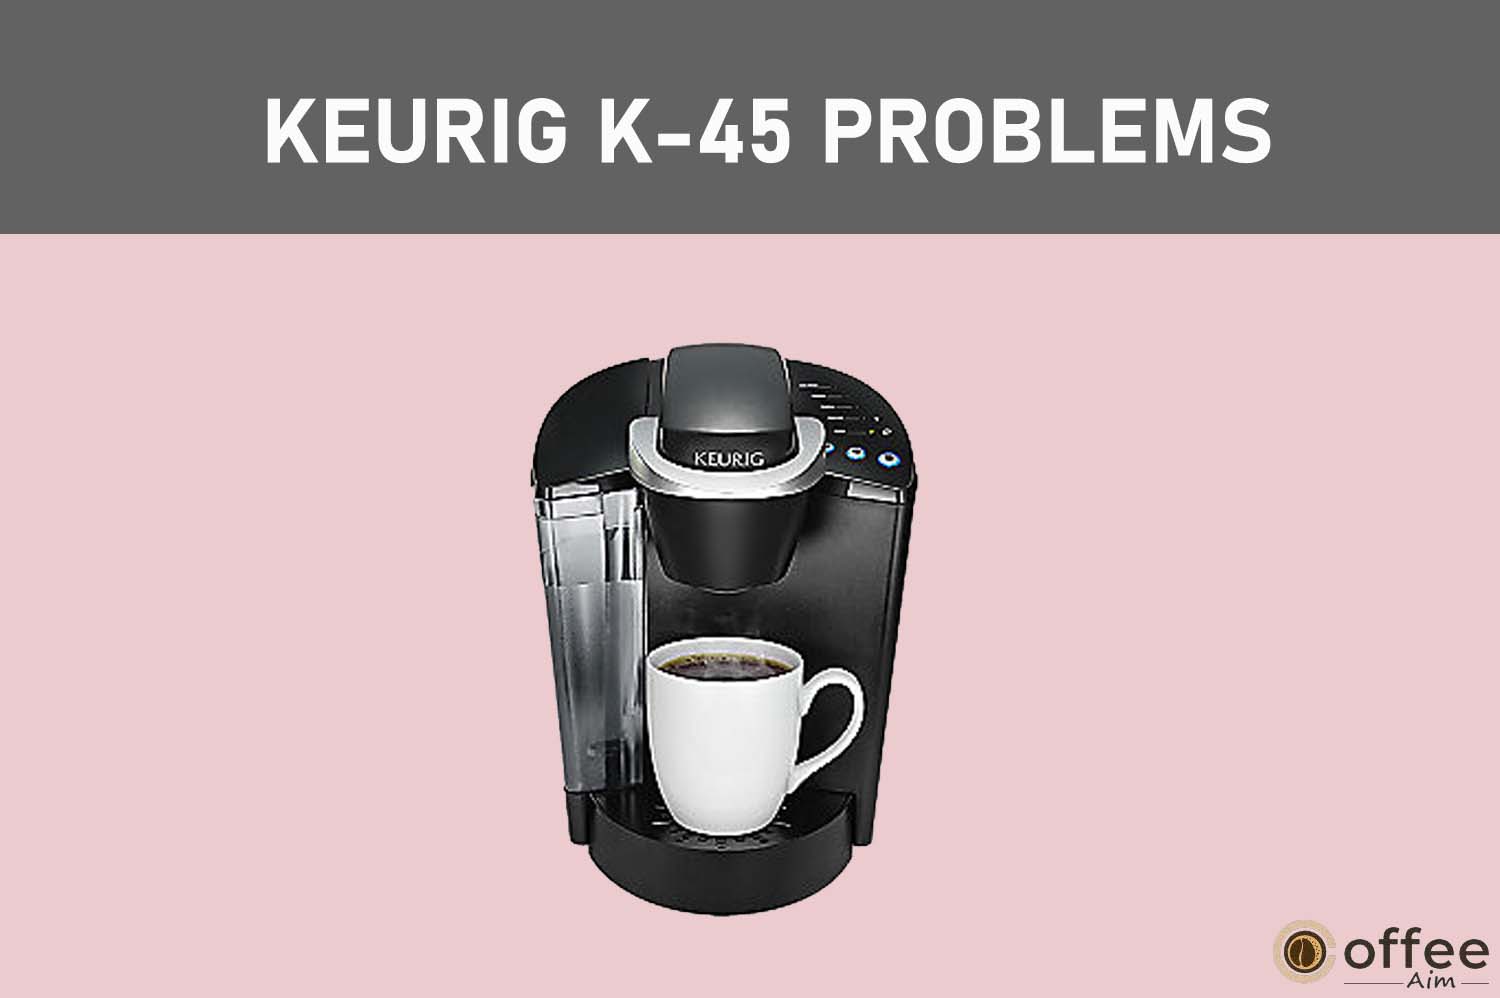 Feature image for the article "Keurig K-45 problems"